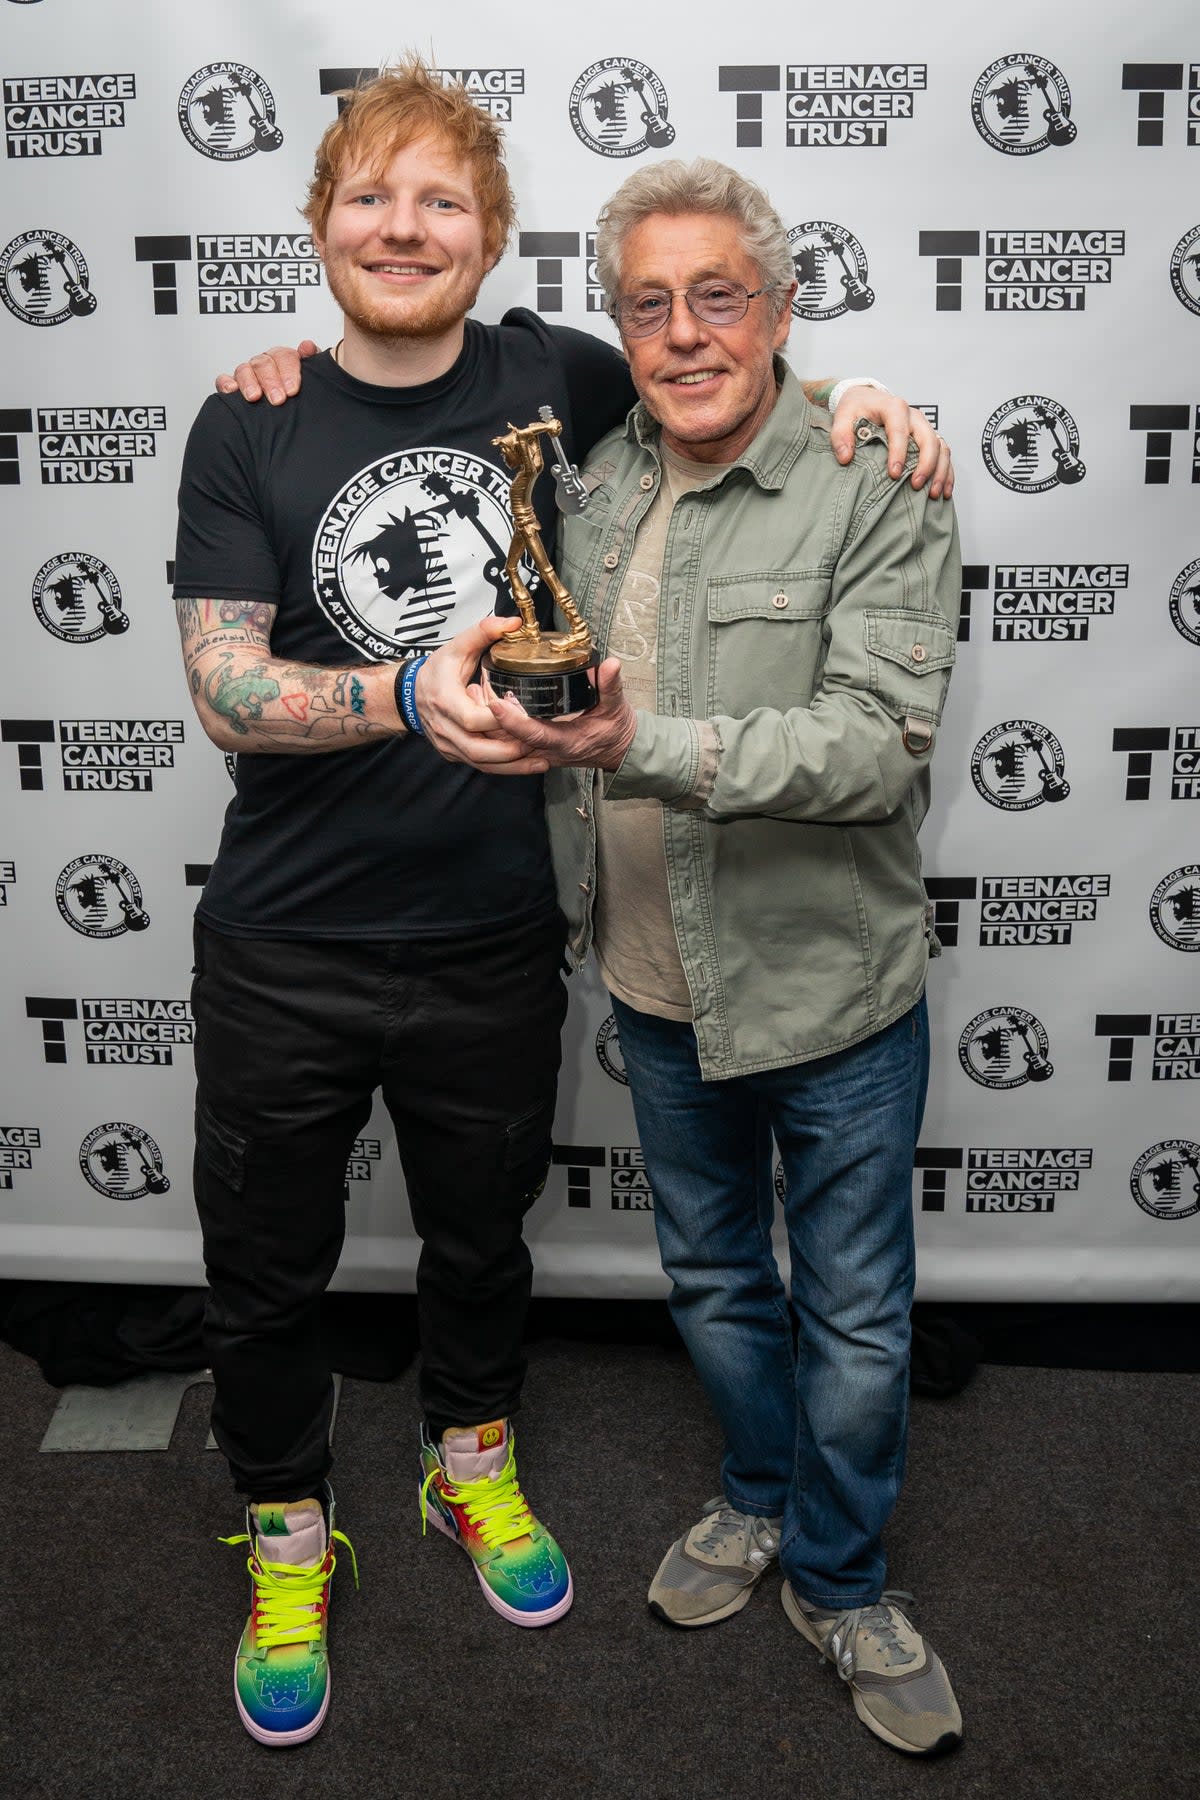 Roger Daltrey with Ed Sheeran at a Teenage Cancer Trust event (Aaron Chown/PA) (PA Wire)